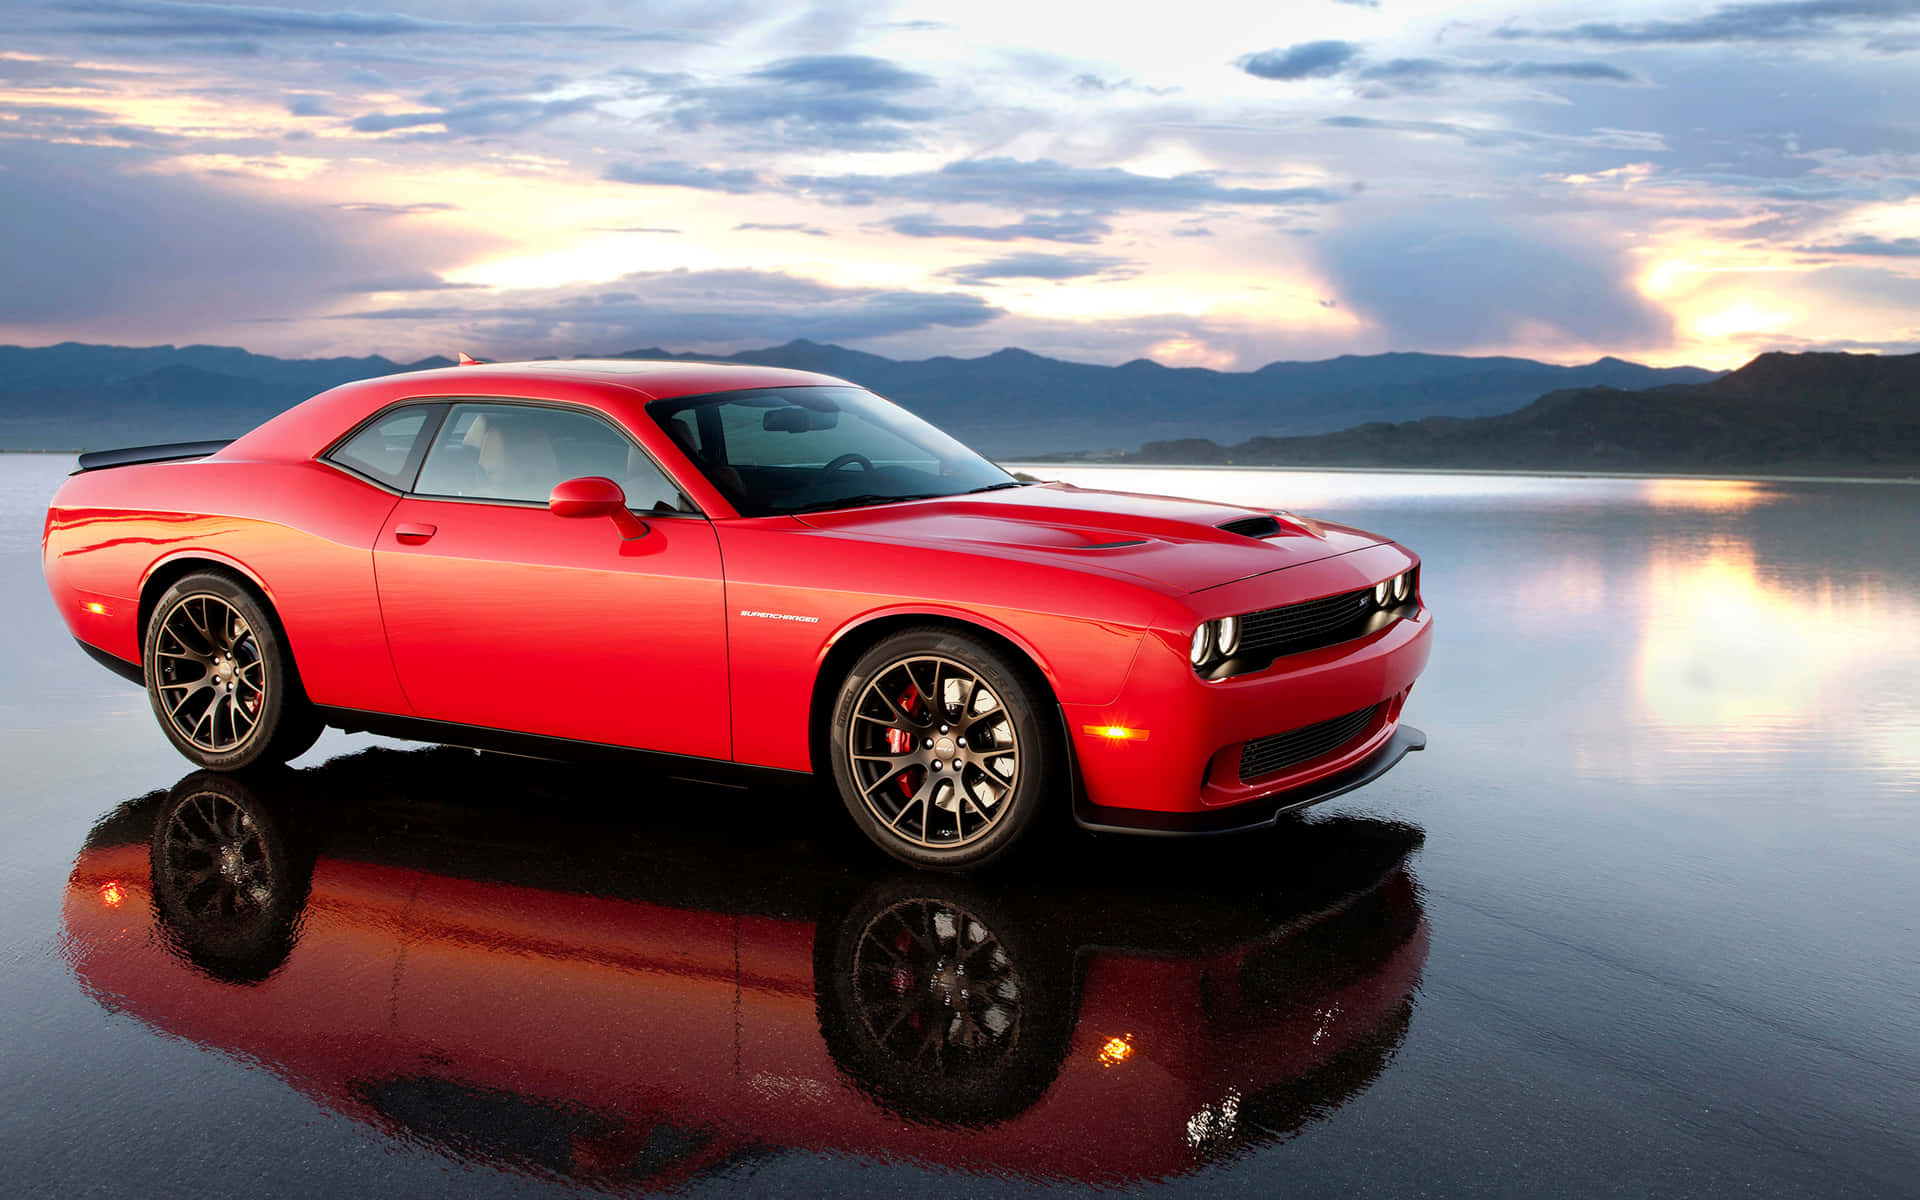 "Take On the Road with the Dodge Hellcat" Wallpaper